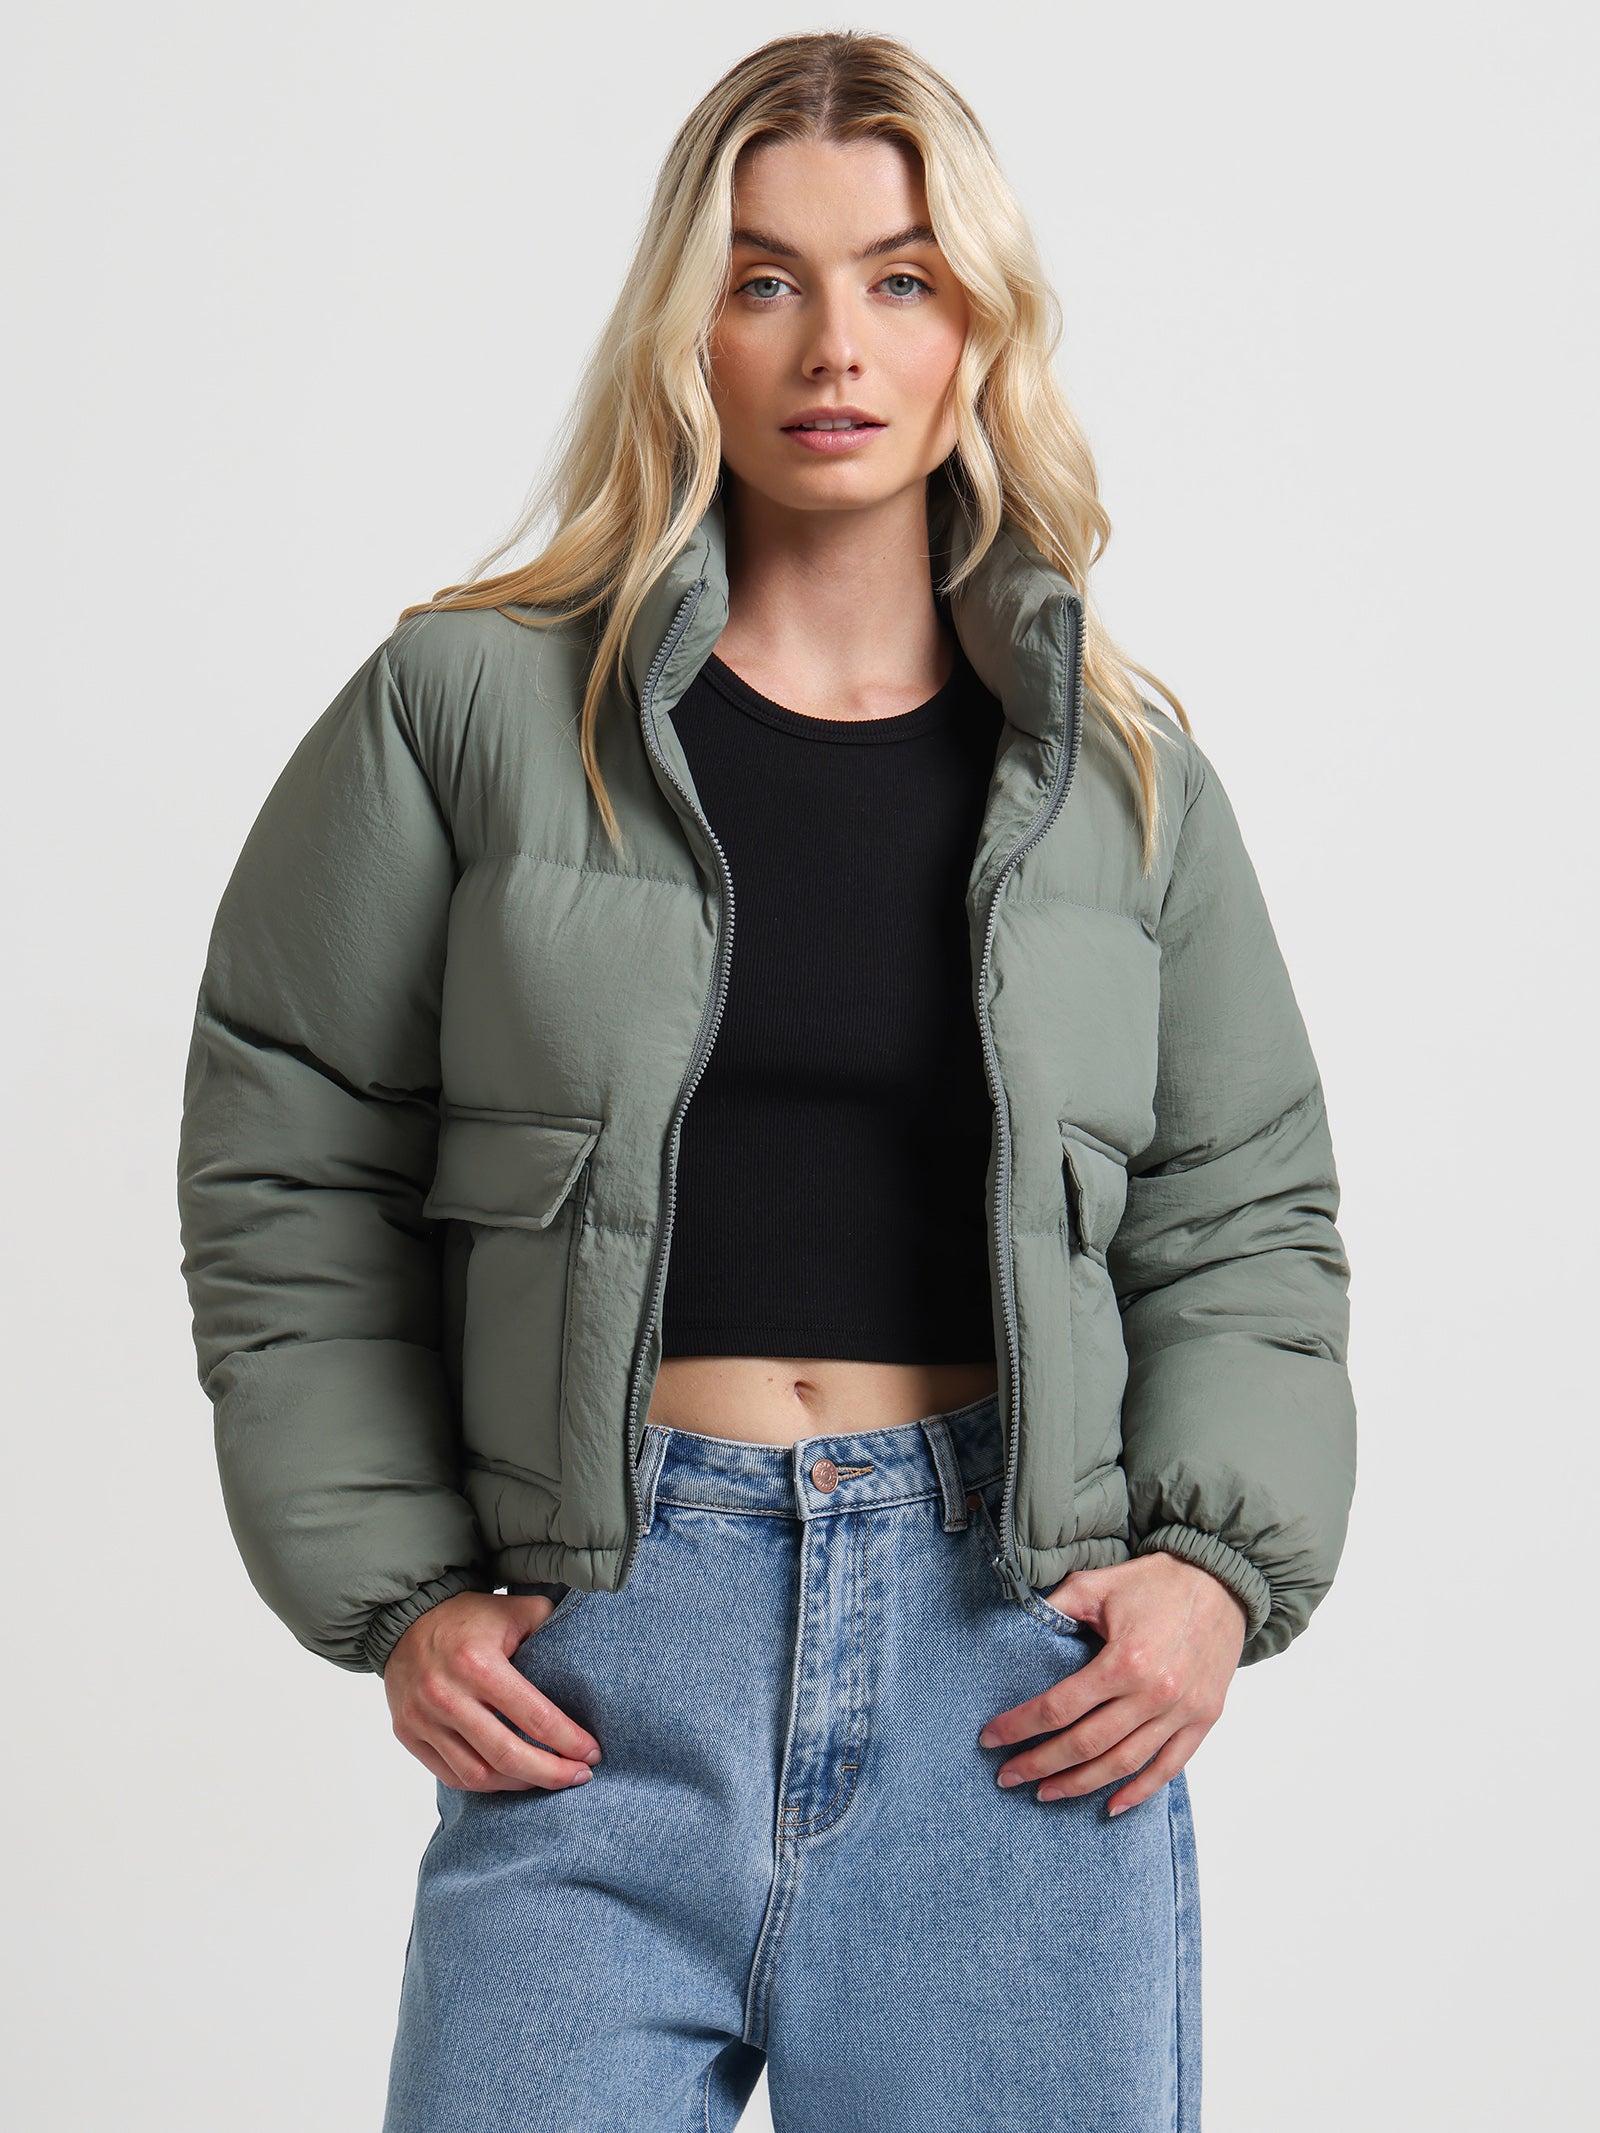 Isola Puffer Jacket in Pewter - Glue Store